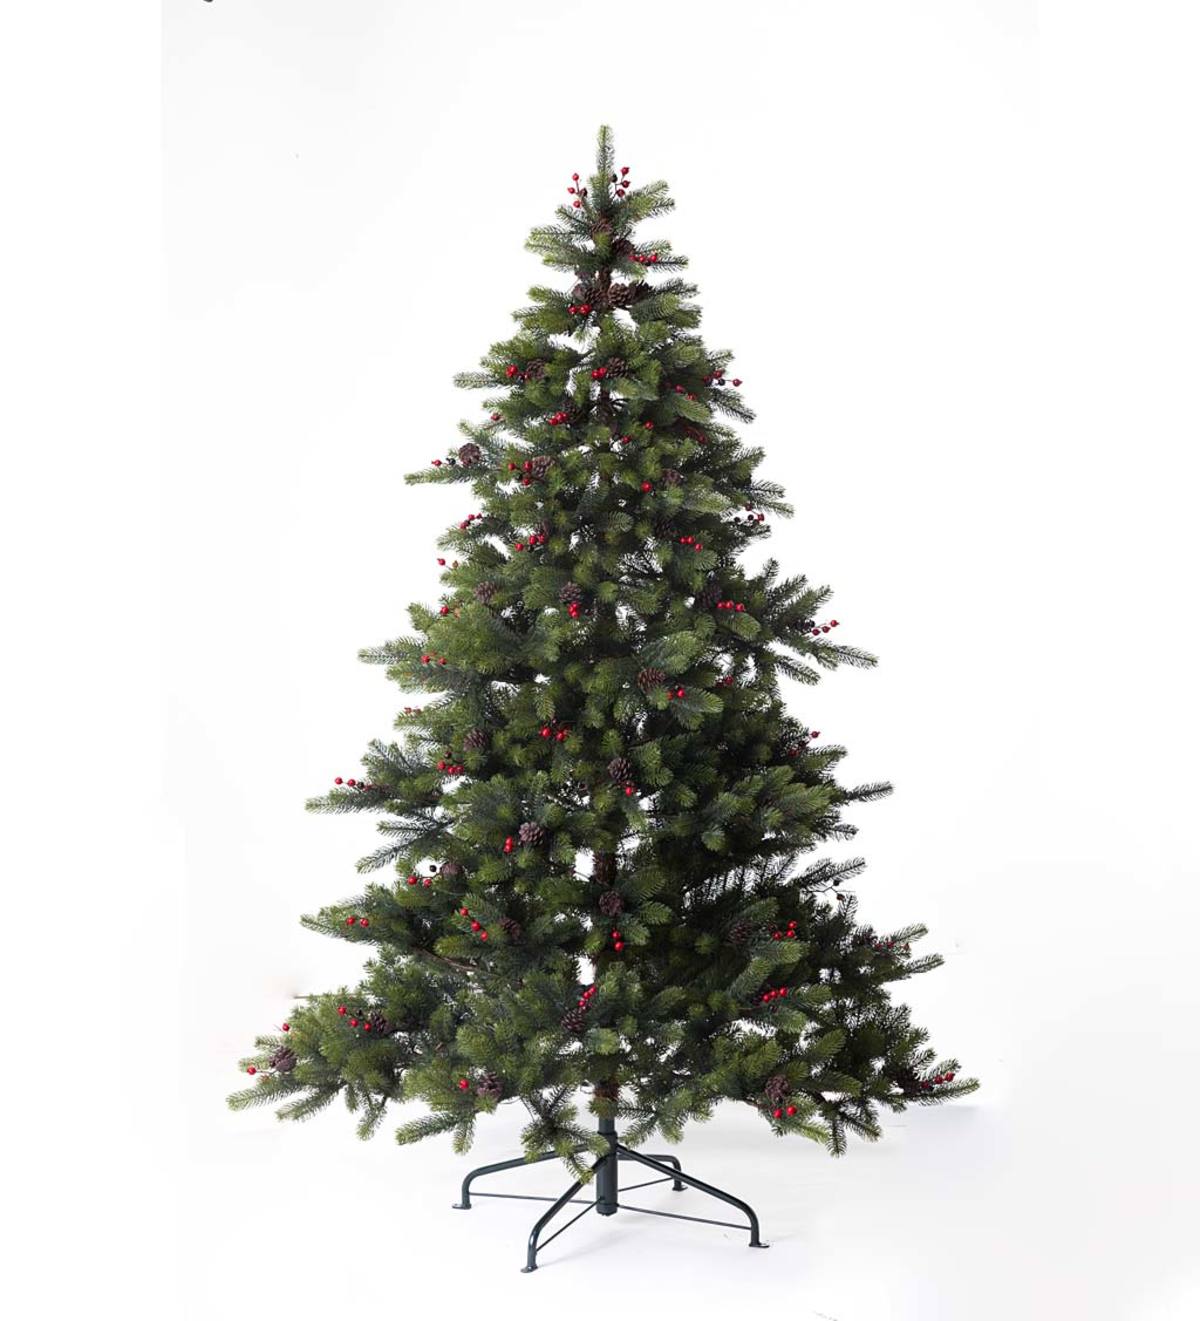 Chippewa Spruce Christmas Tree, 7' Tall with 640 Lights